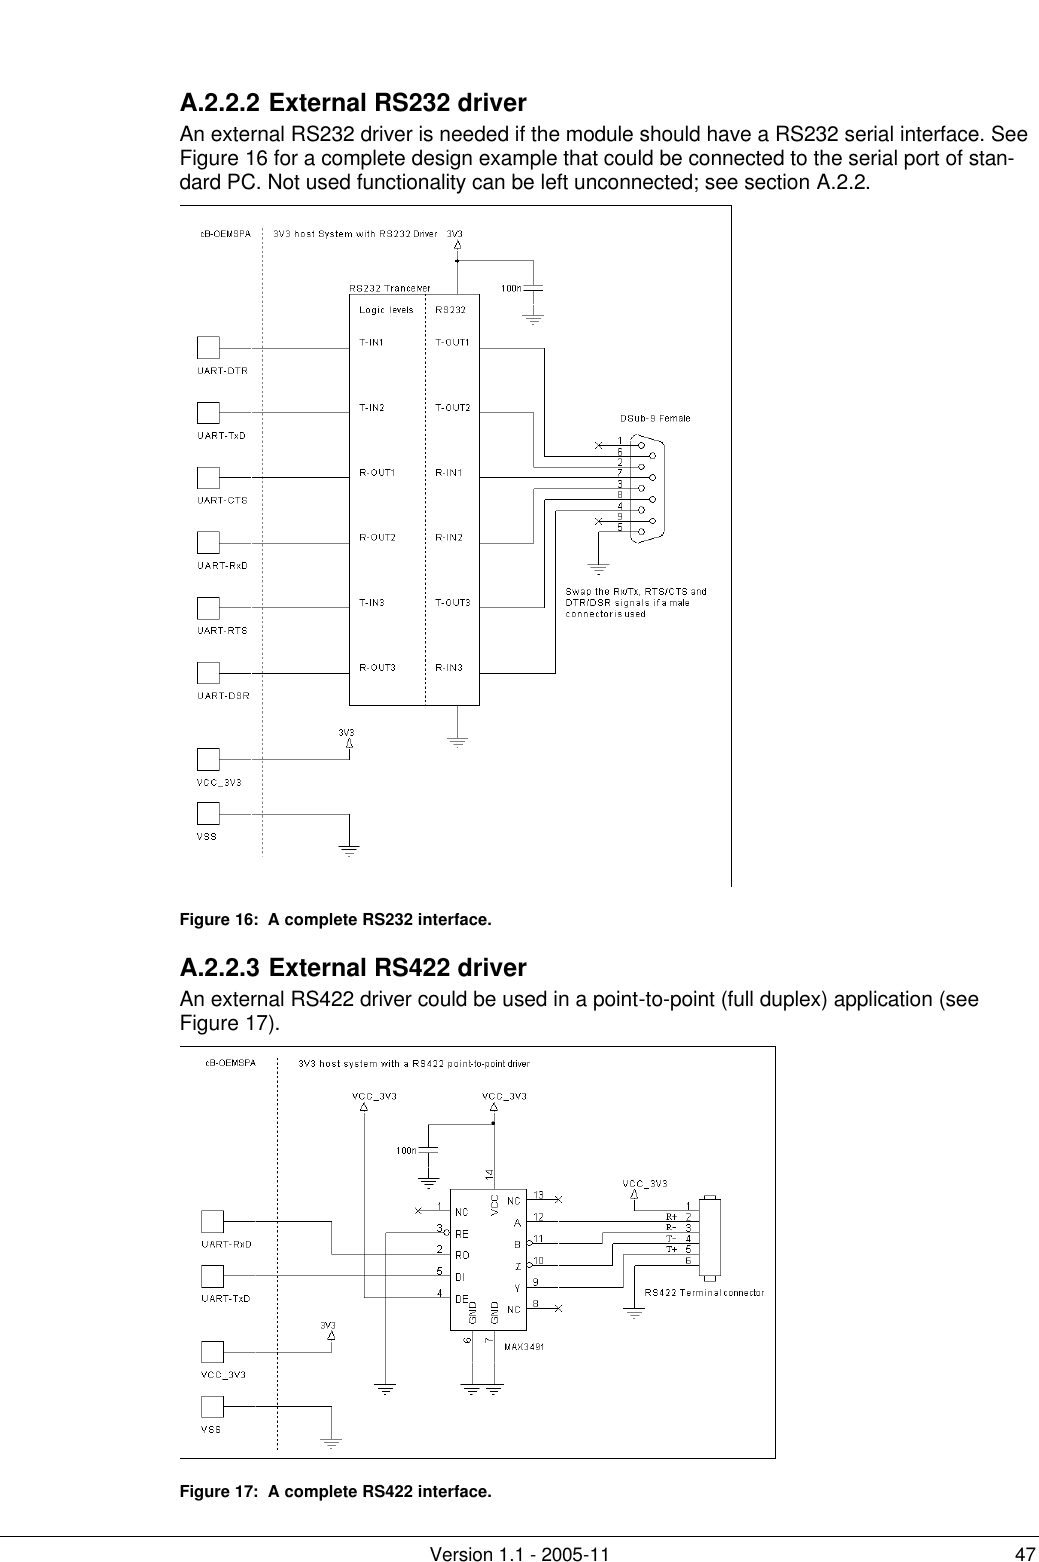         Version 1.1 - 2005-11 47  A.2.2.2 External RS232 driver An external RS232 driver is needed if the module should have a RS232 serial interface. See Figure 16 for a complete design example that could be connected to the serial port of stan-dard PC. Not used functionality can be left unconnected; see section A.2.2.  Figure 16:  A complete RS232 interface. A.2.2.3 External RS422 driver An external RS422 driver could be used in a point-to-point (full duplex) application (see Figure 17).  Figure 17:  A complete RS422 interface. 